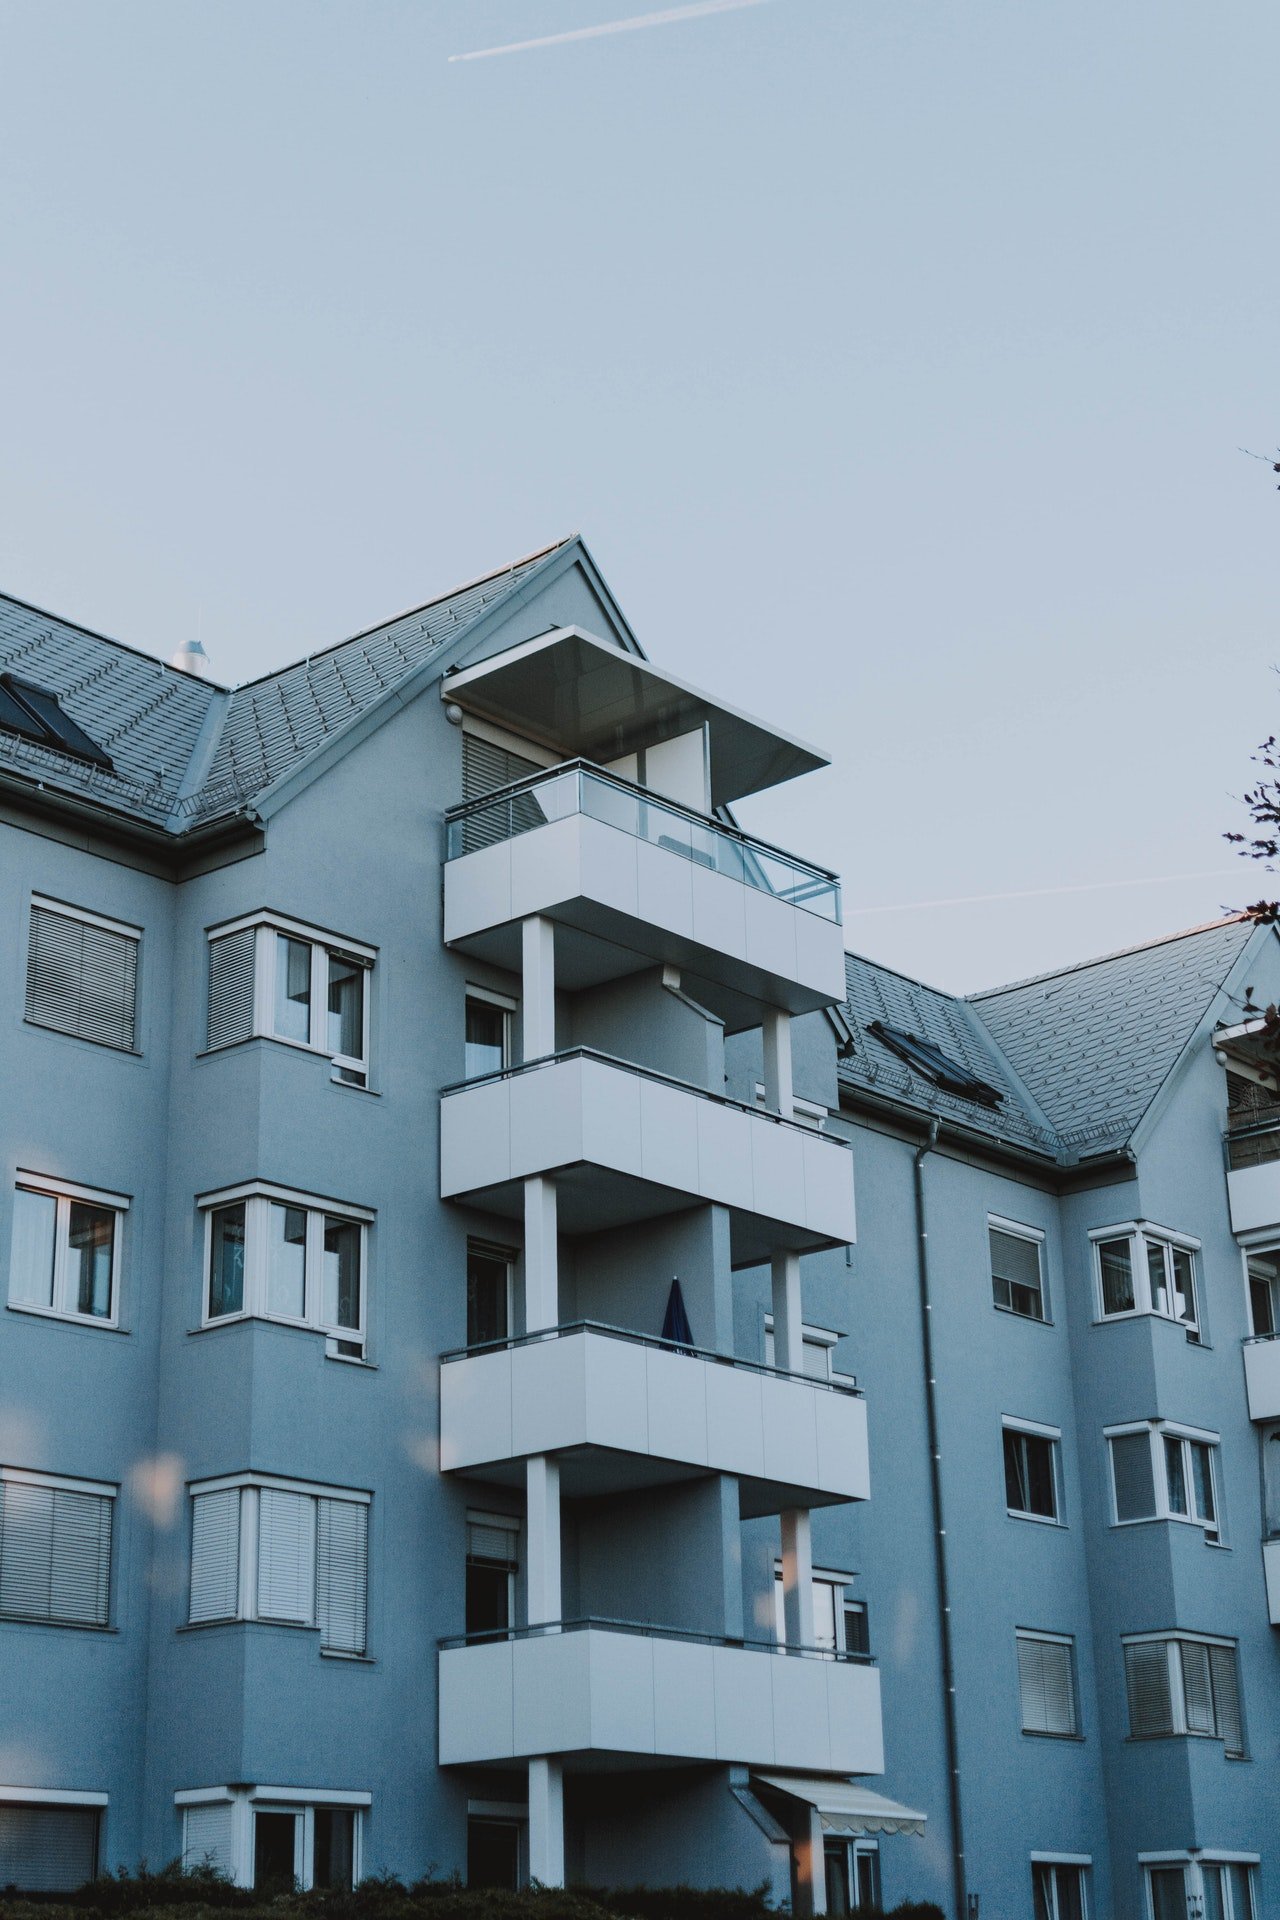 The address led him to an apartment building. | Source: Pexels